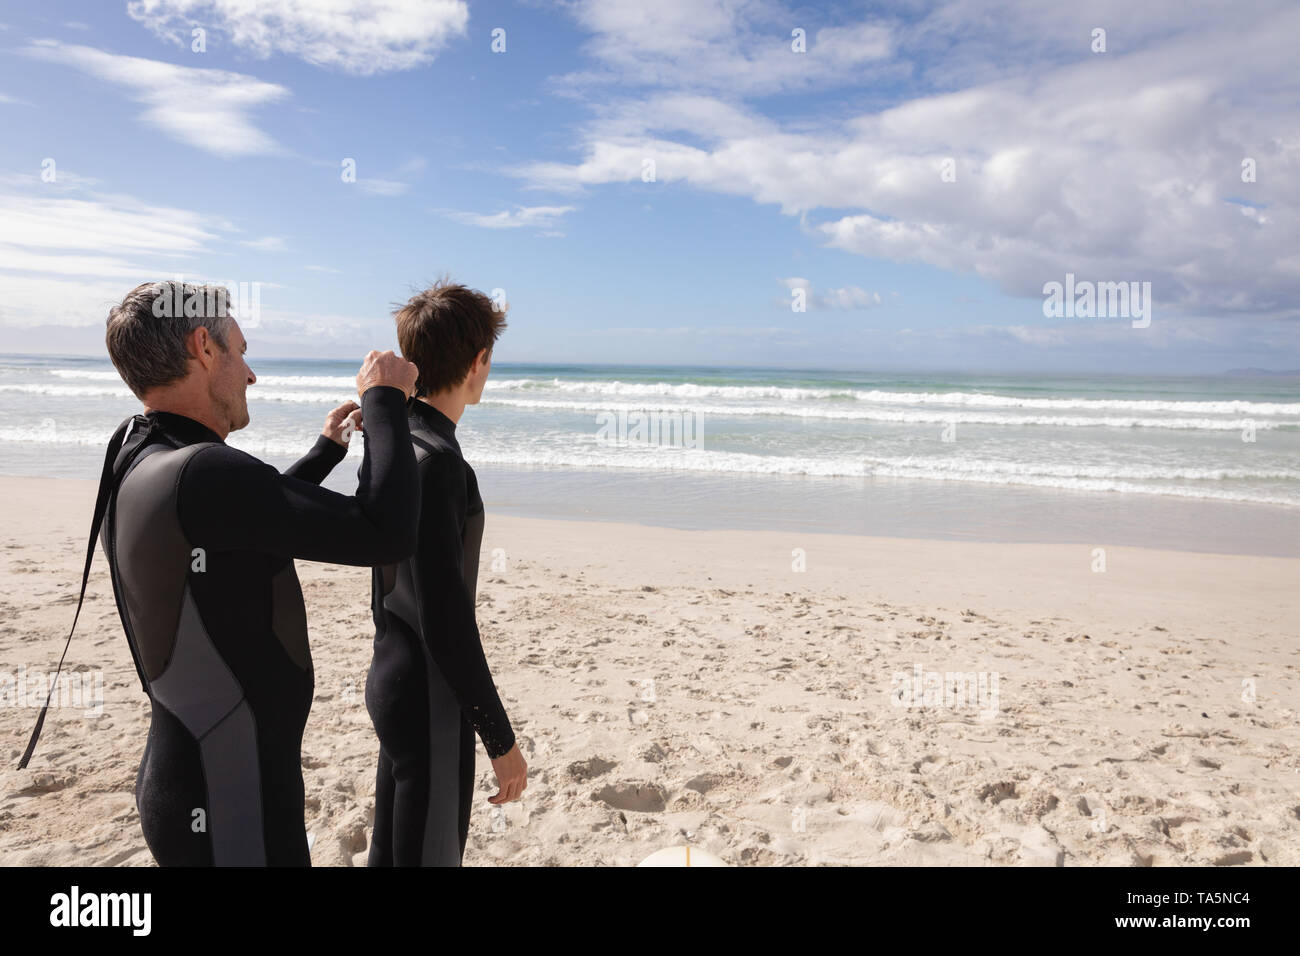 Father assist son to wear wetsuit at beach Stock Photo